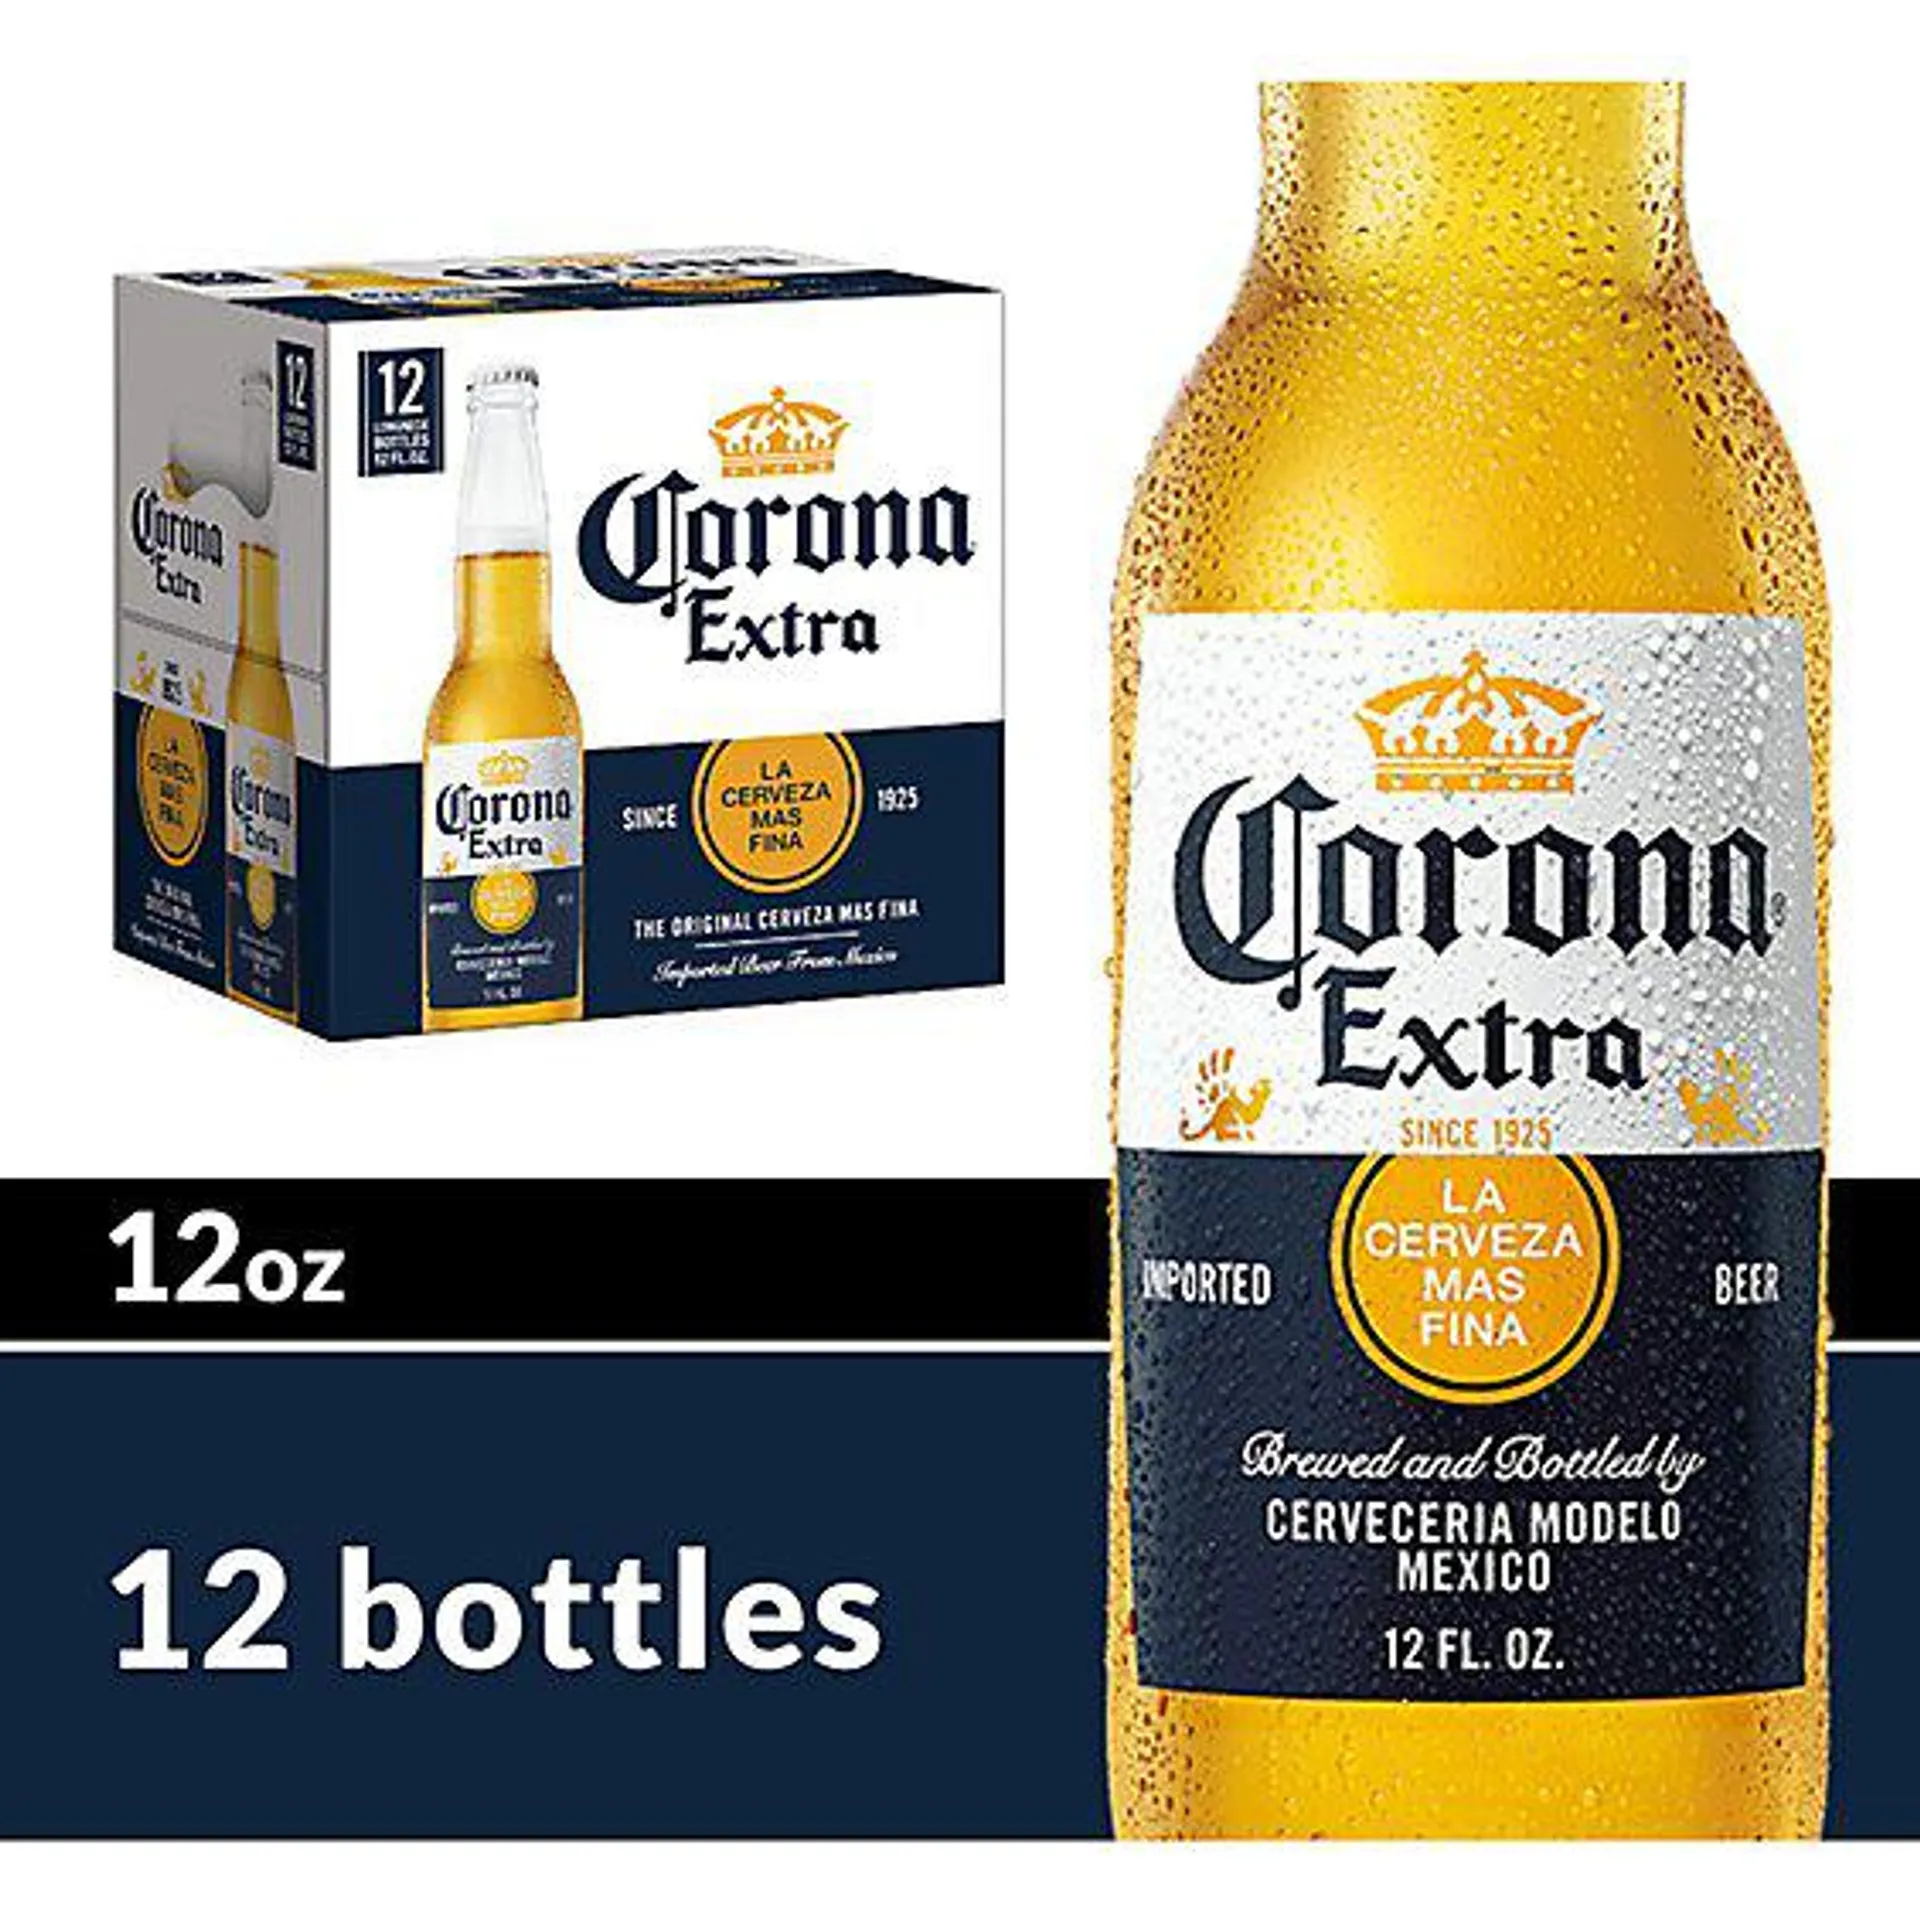 Corona Extra Lager Mexican Bee... tles - 12-12 Fl. Oz.